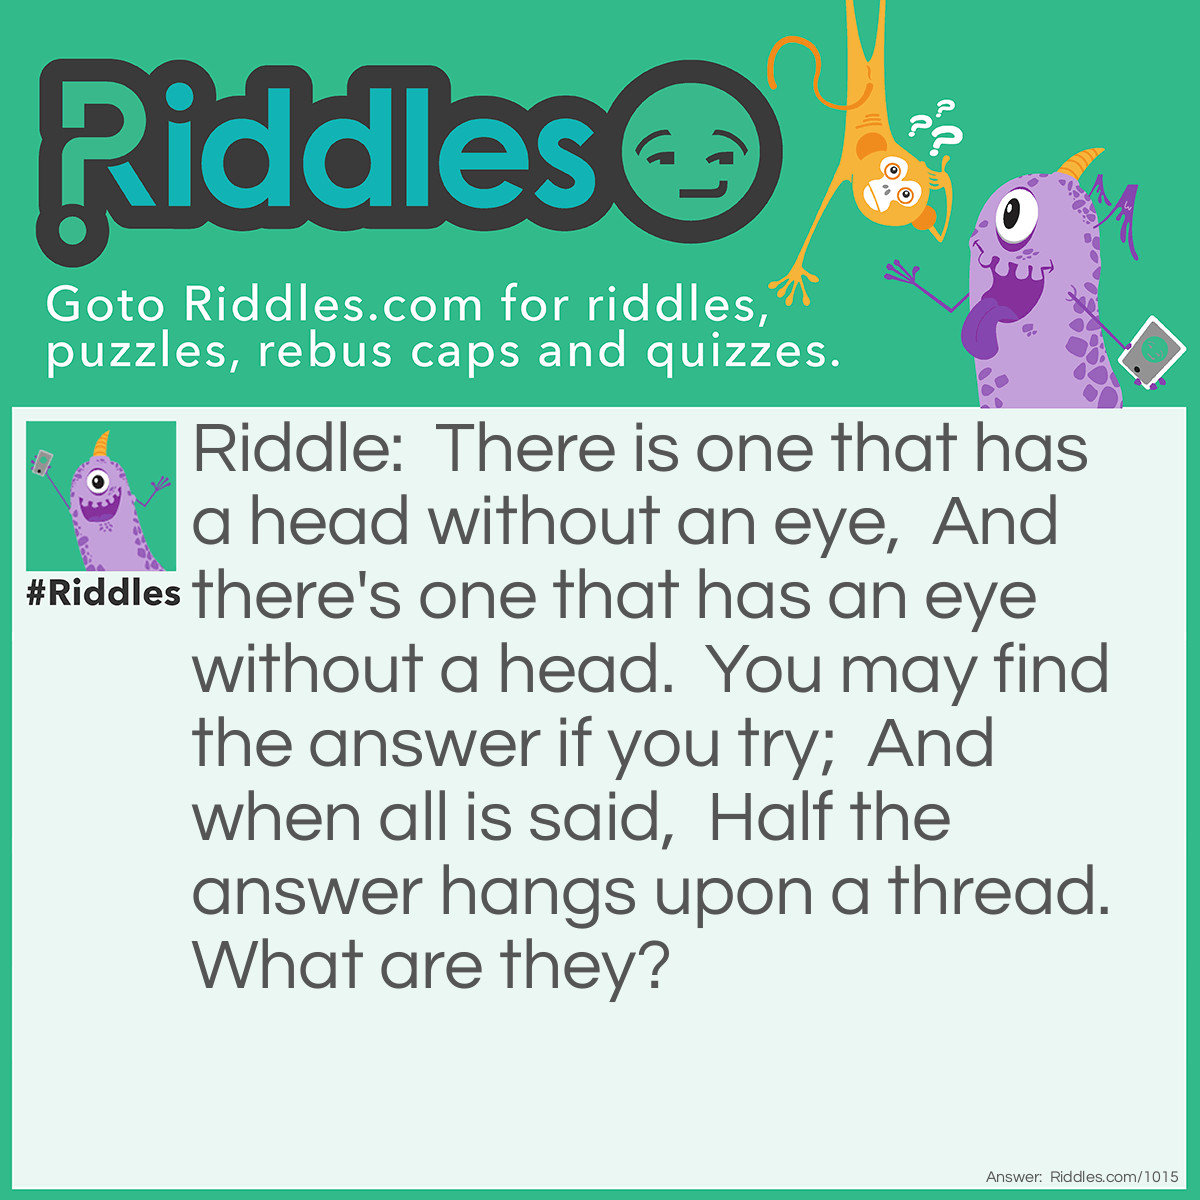 Riddle: There is one that has a head without an eye,  And there's one that has an eye without a head.  You may find the answer if you try;  And when all is said,  Half the answer hangs upon a thread. What are they? Answer: A pin and needle.